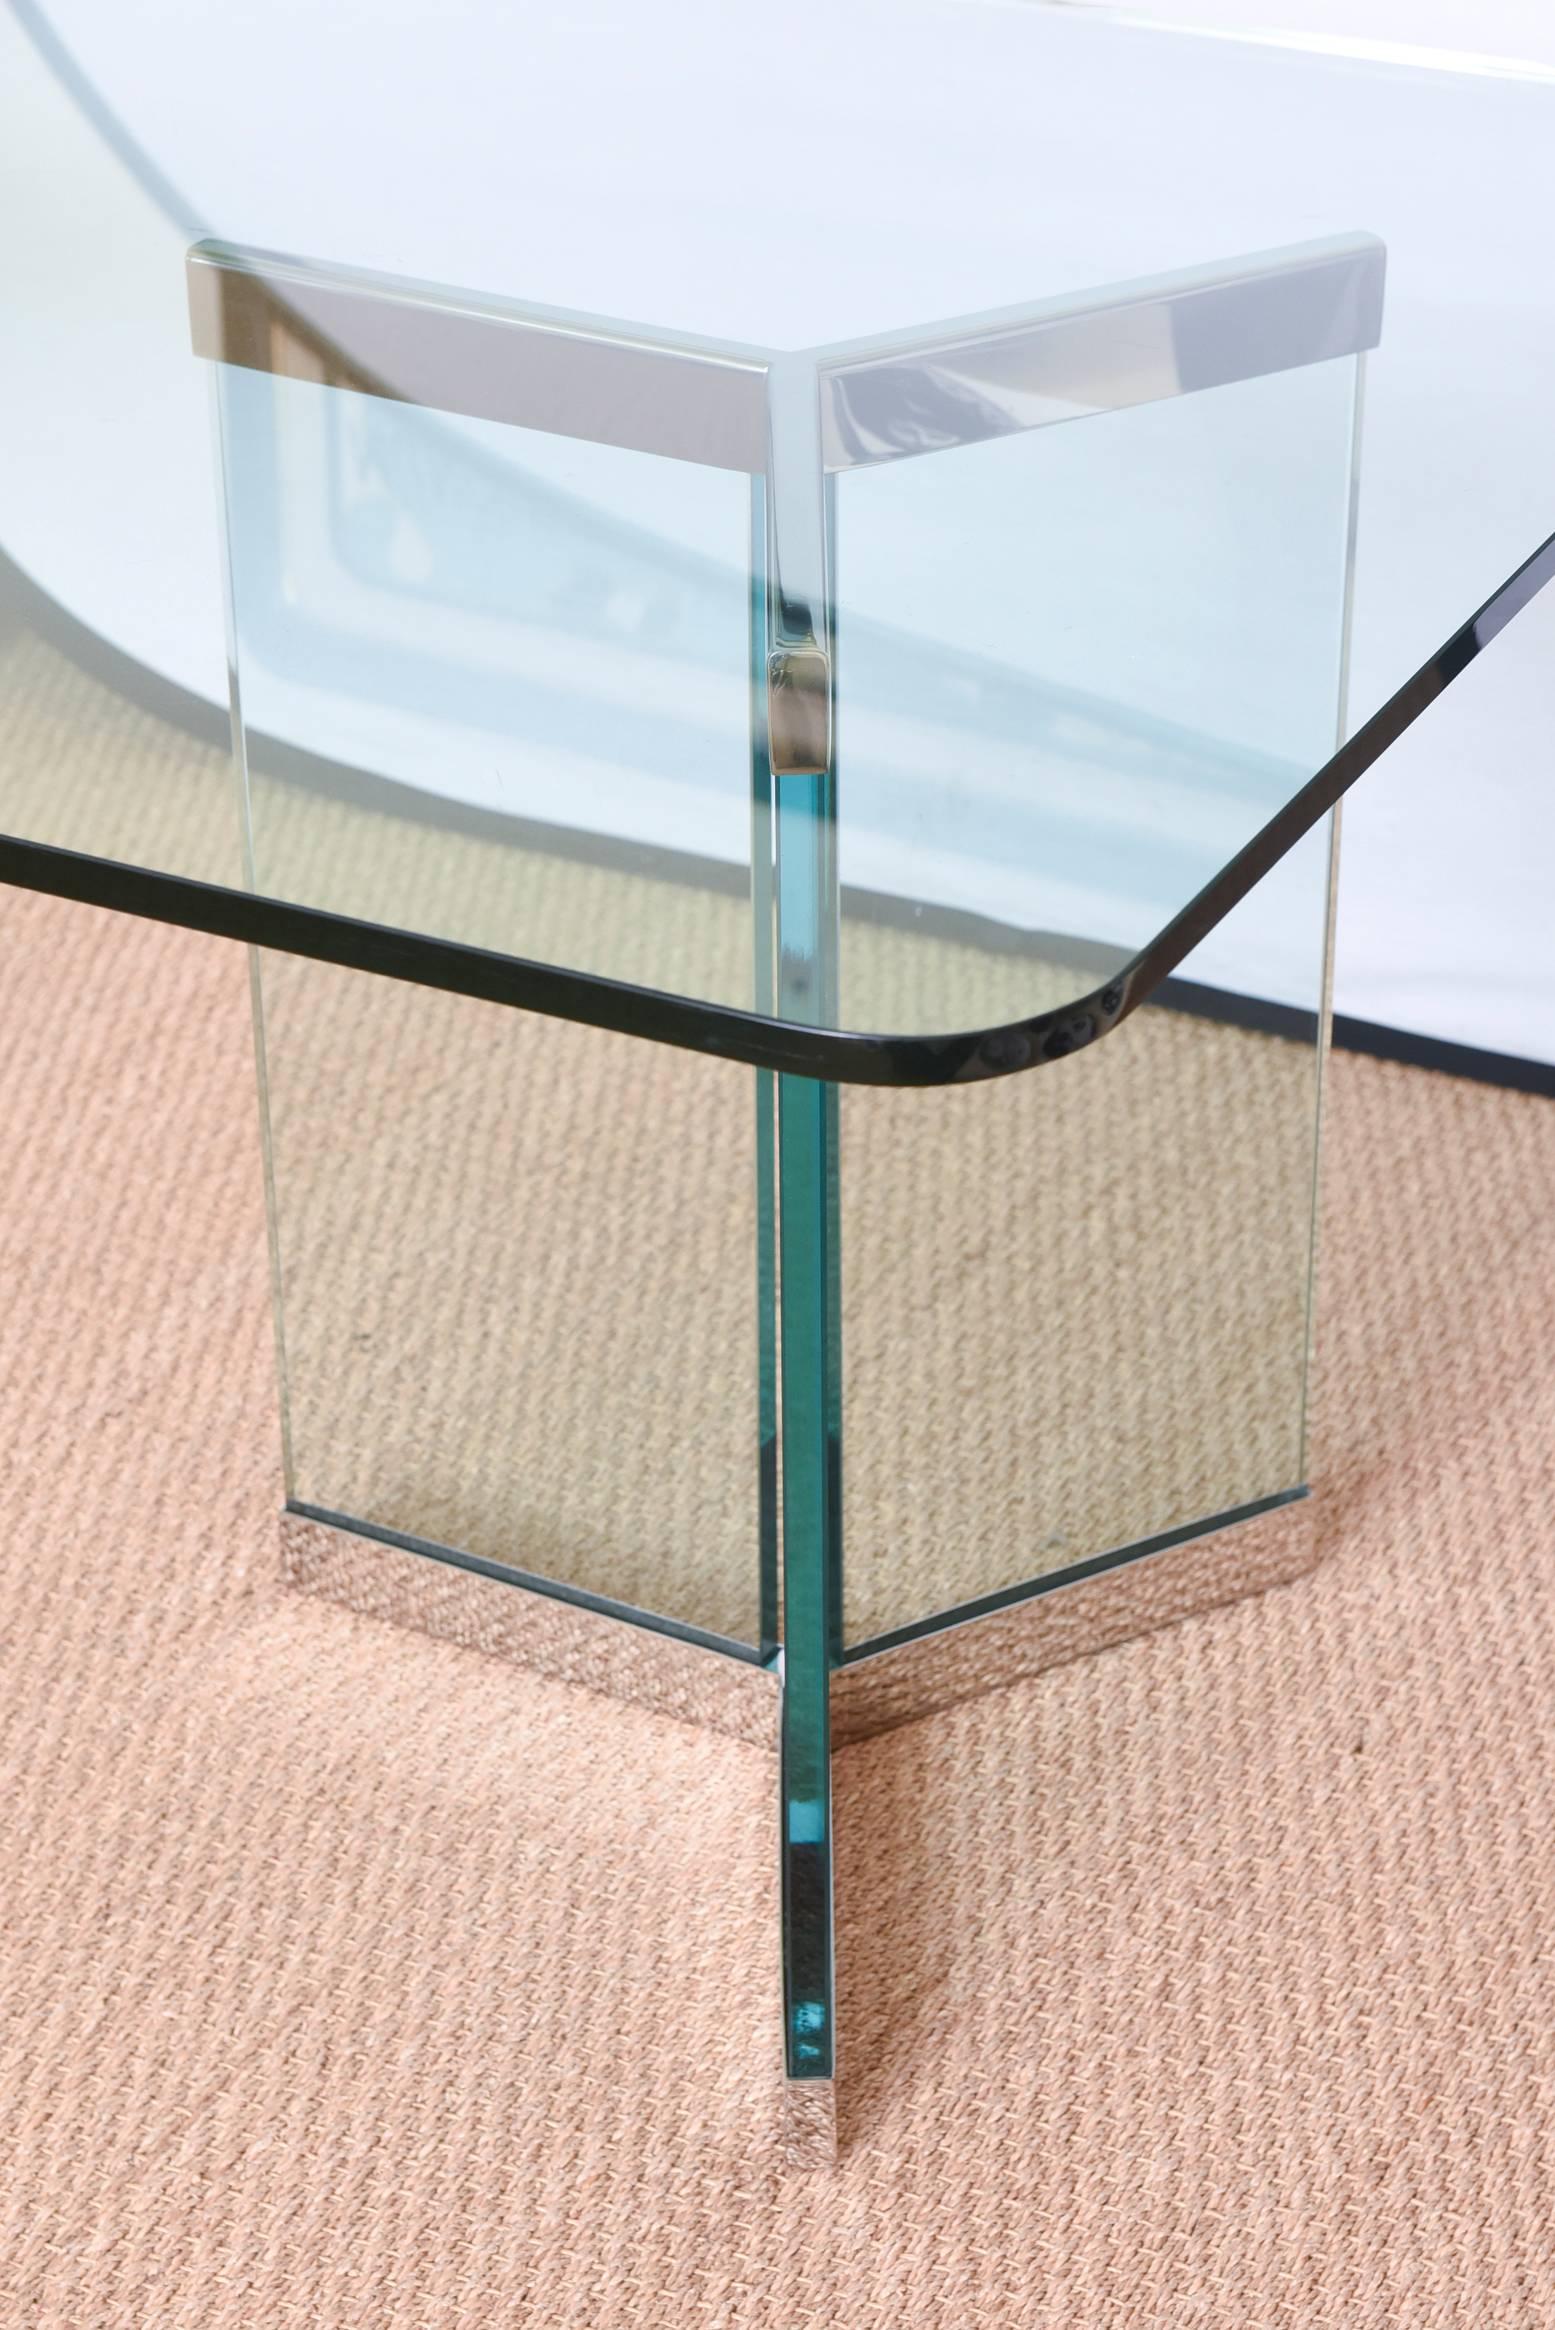 Glass Leon Rosen for Pace Sculptural Dining Table and or Desk